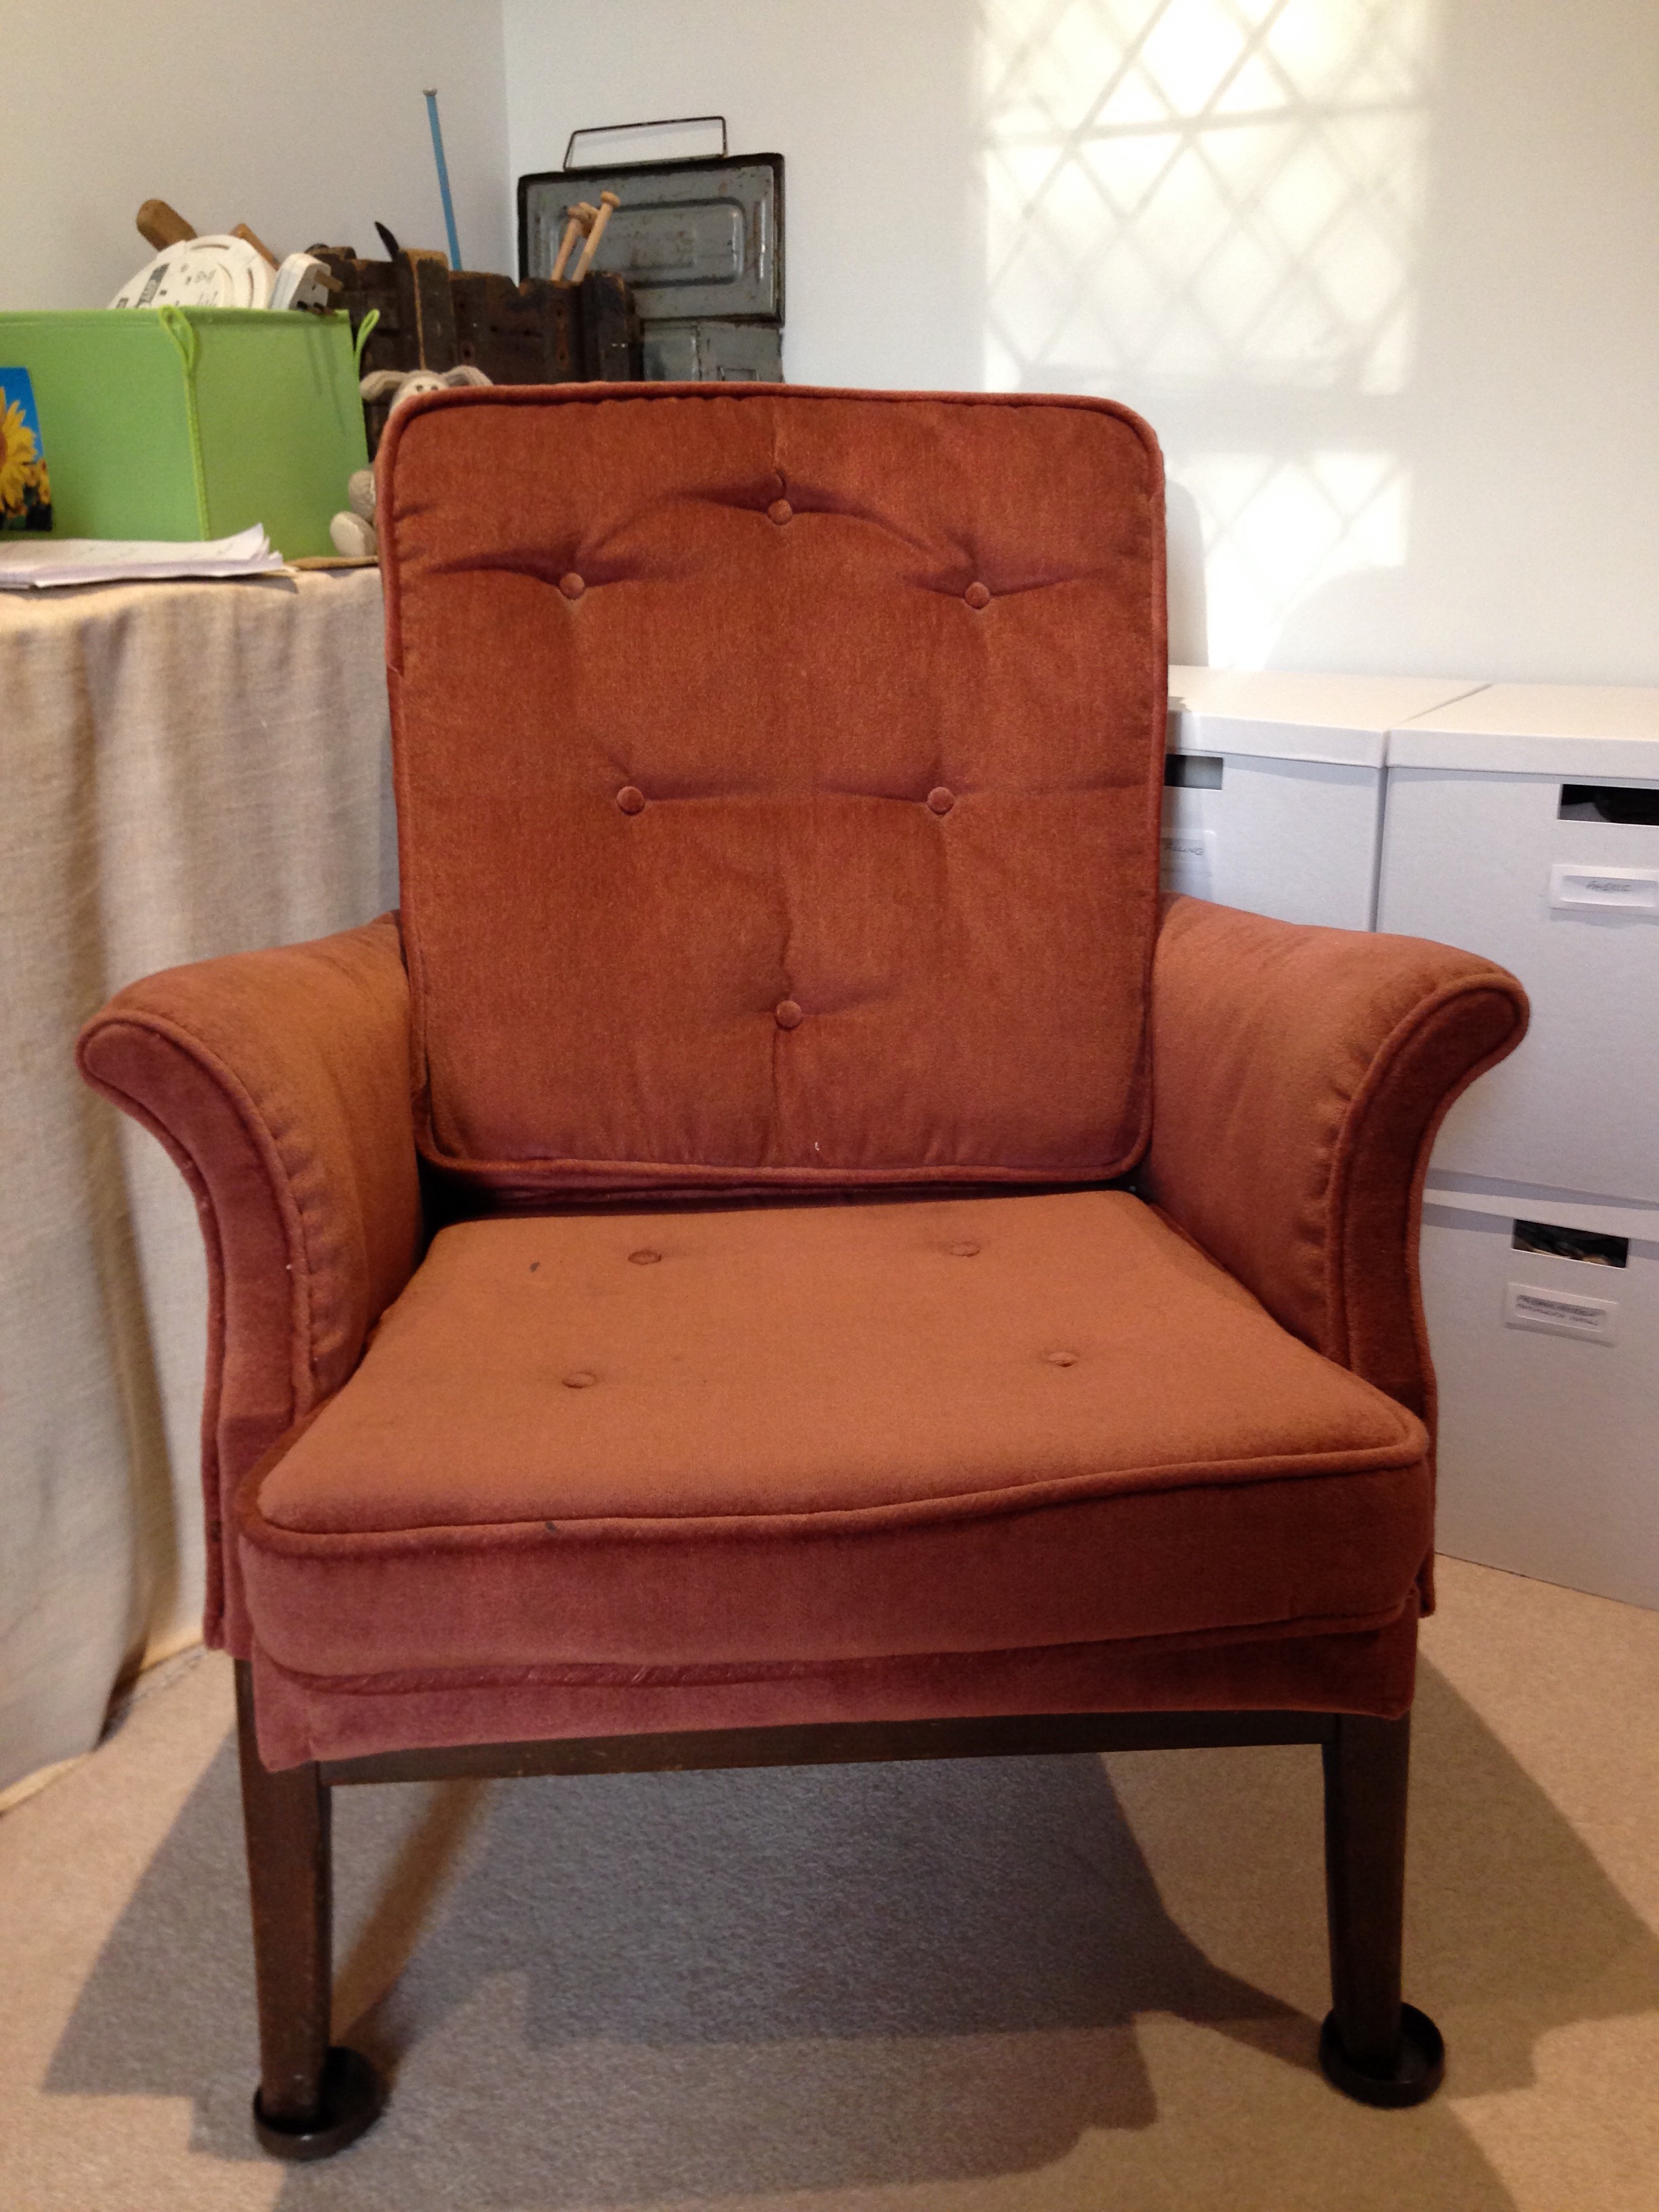 1954 Parker Knoll Reading Chair Before Refurb